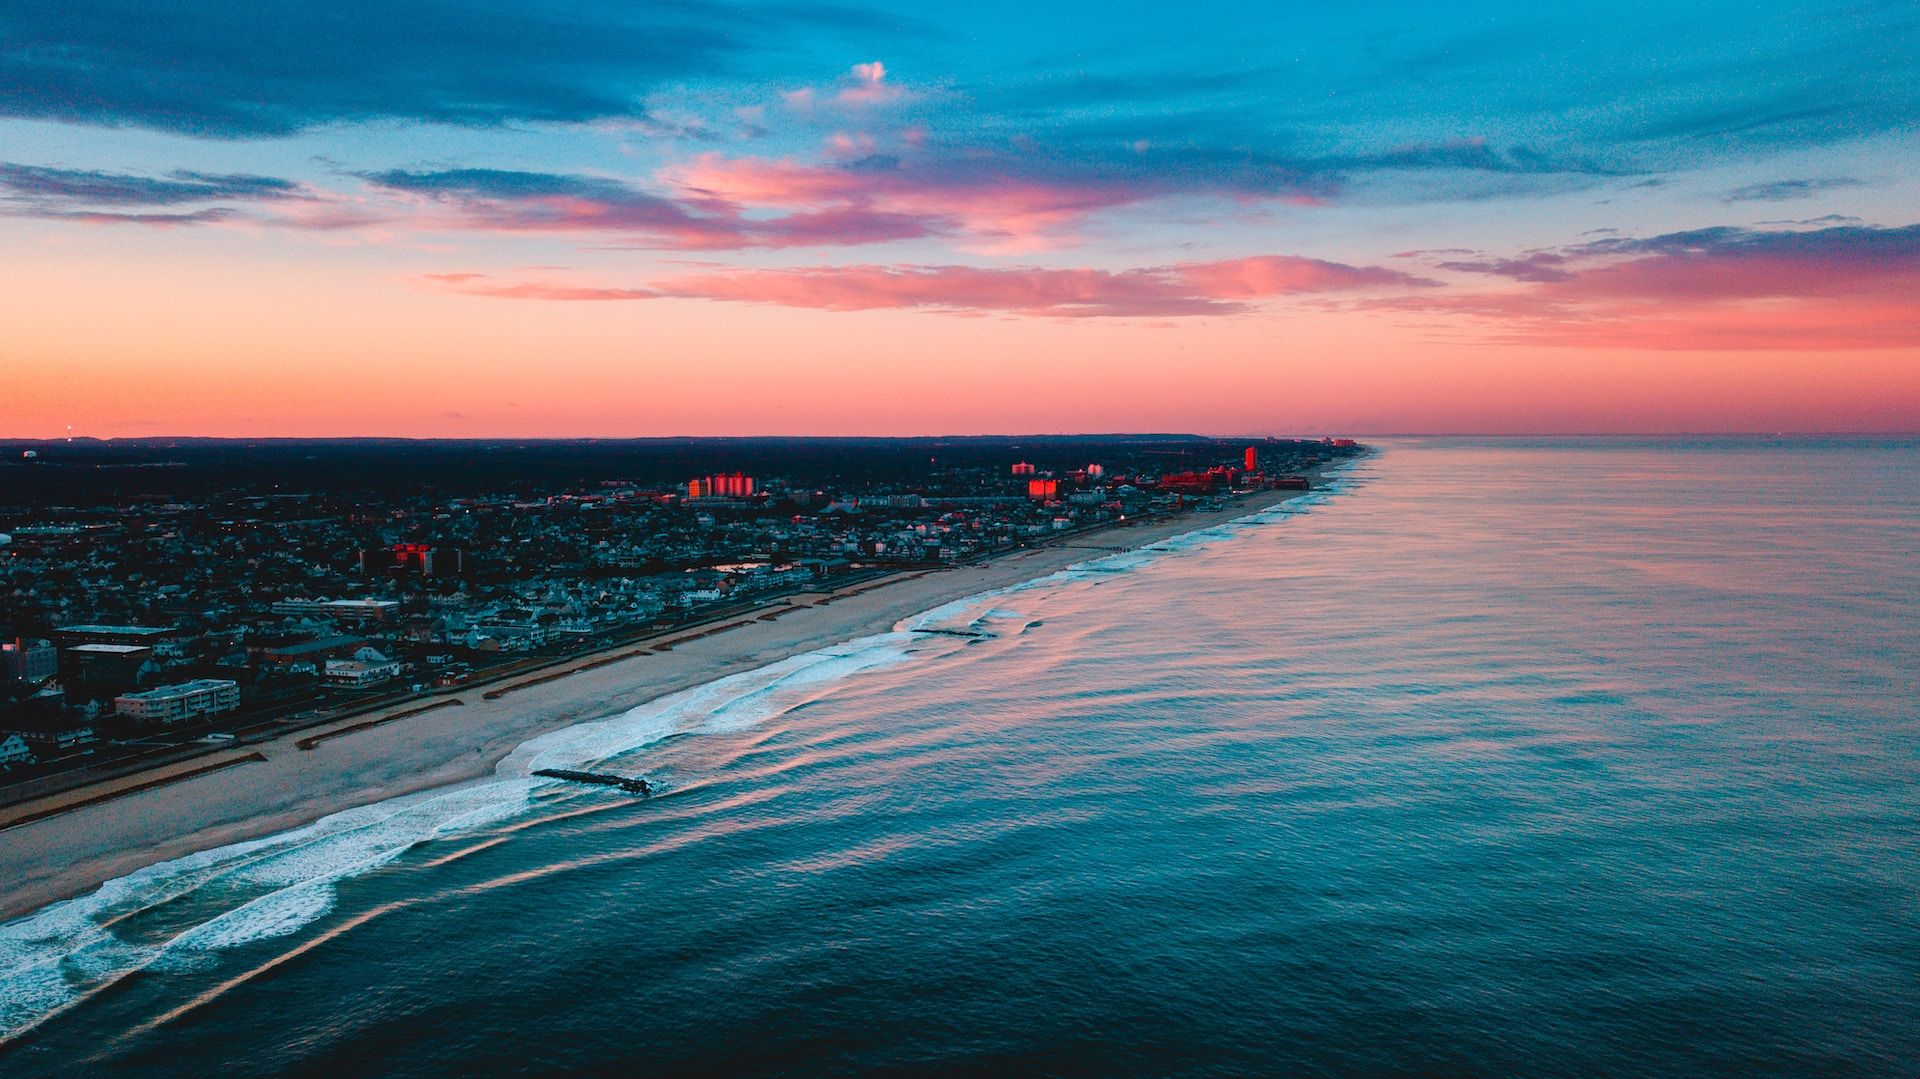 An aerial view of the city, beach, and ocean in Asbury Park, New Jersey, USA